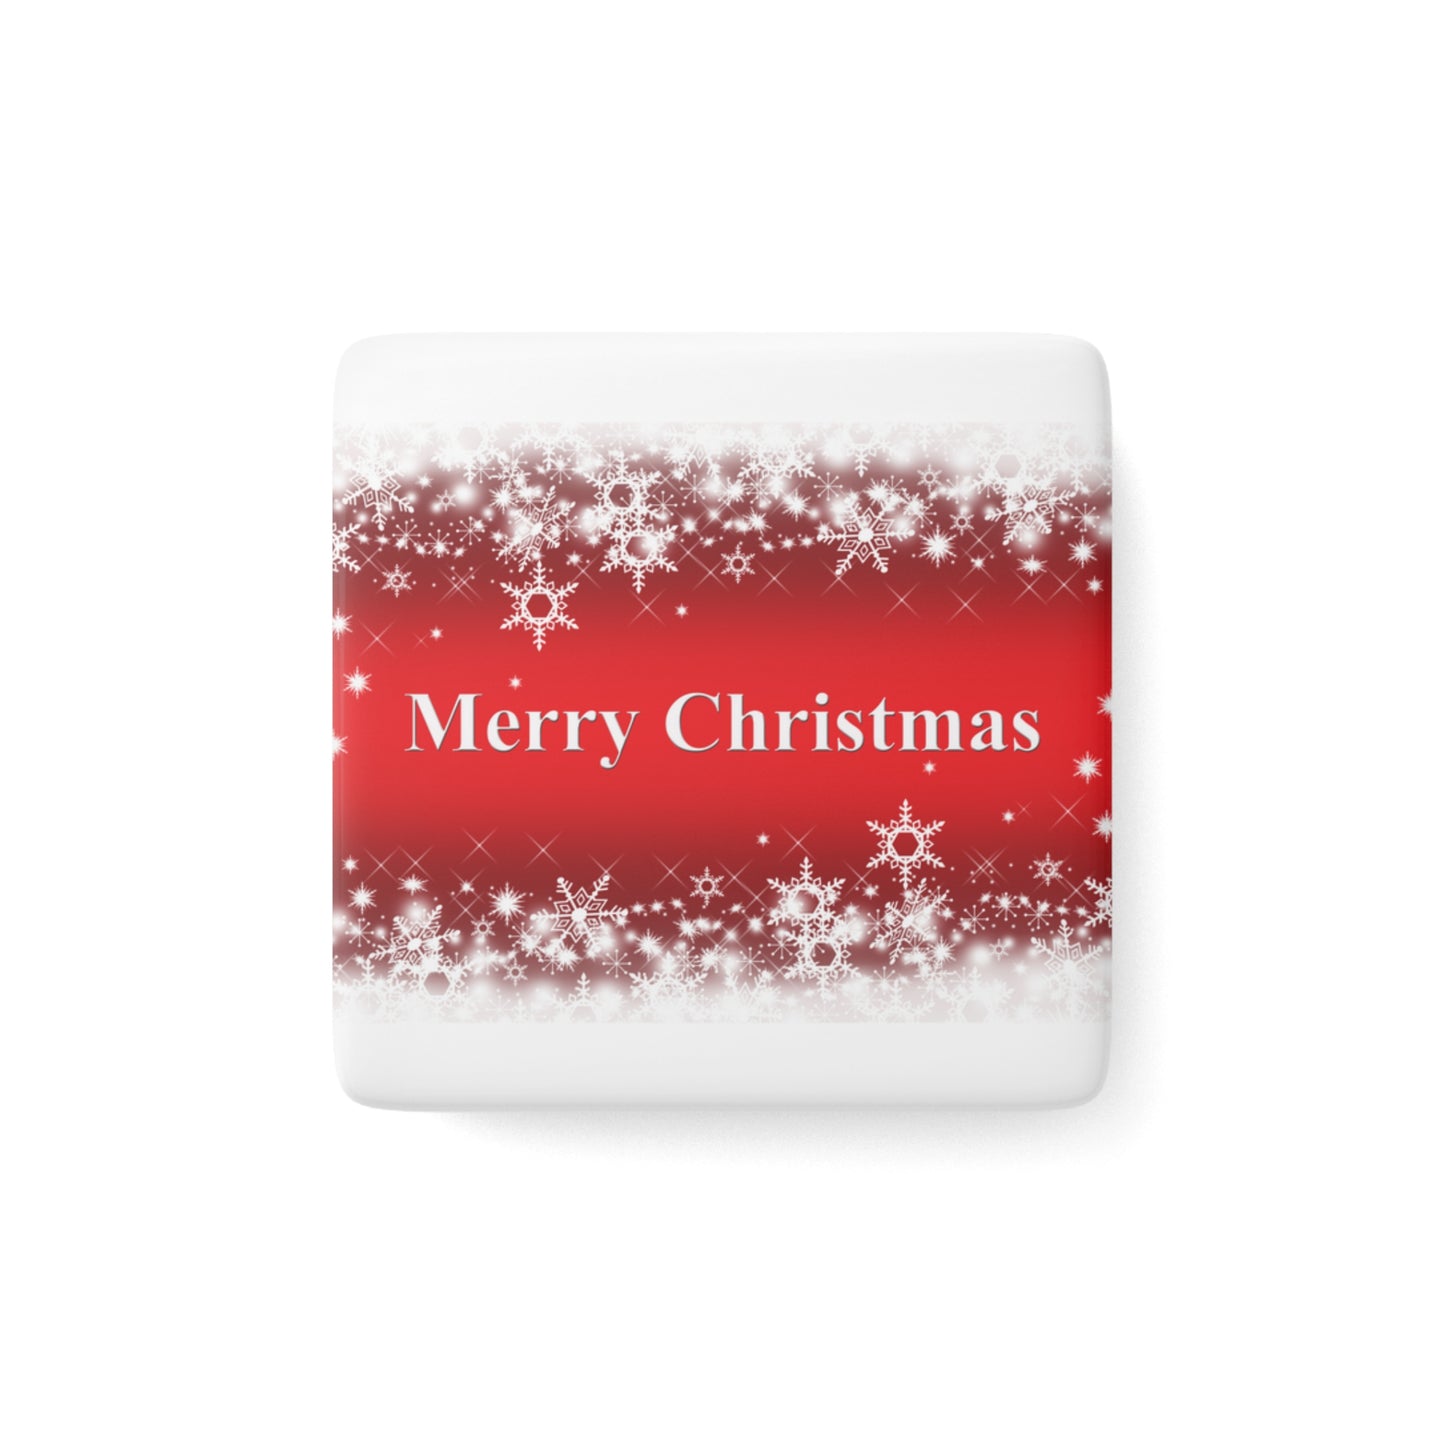 "Merry Christmas" Porcelain Magnet, Square, Glossy Finish